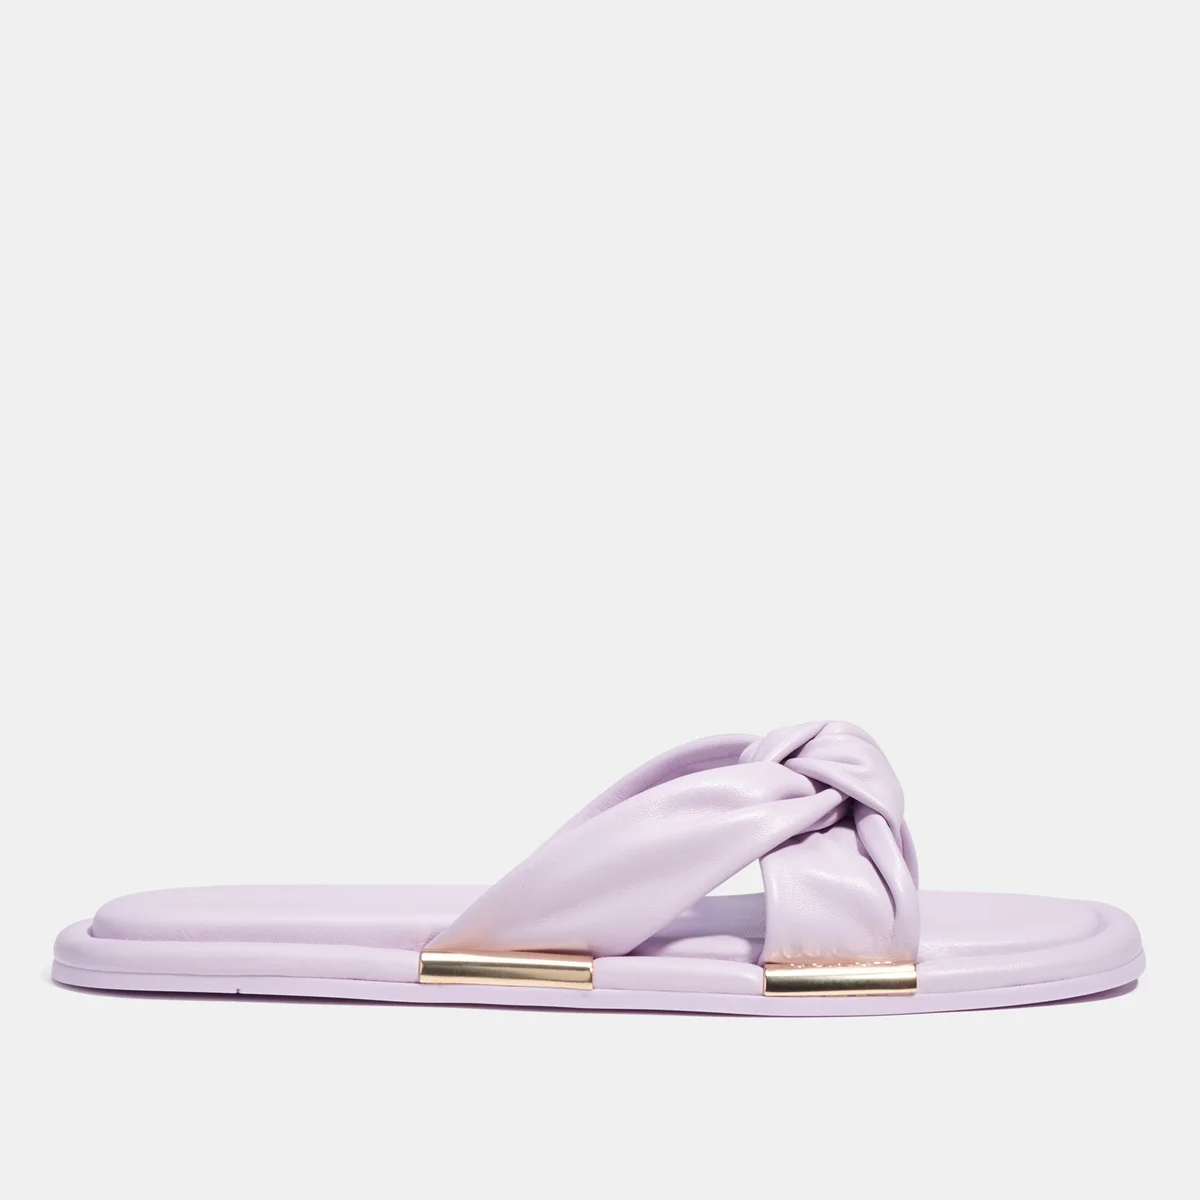 Coach Women's Brooklyn Leather Sandals - Violet Image 1